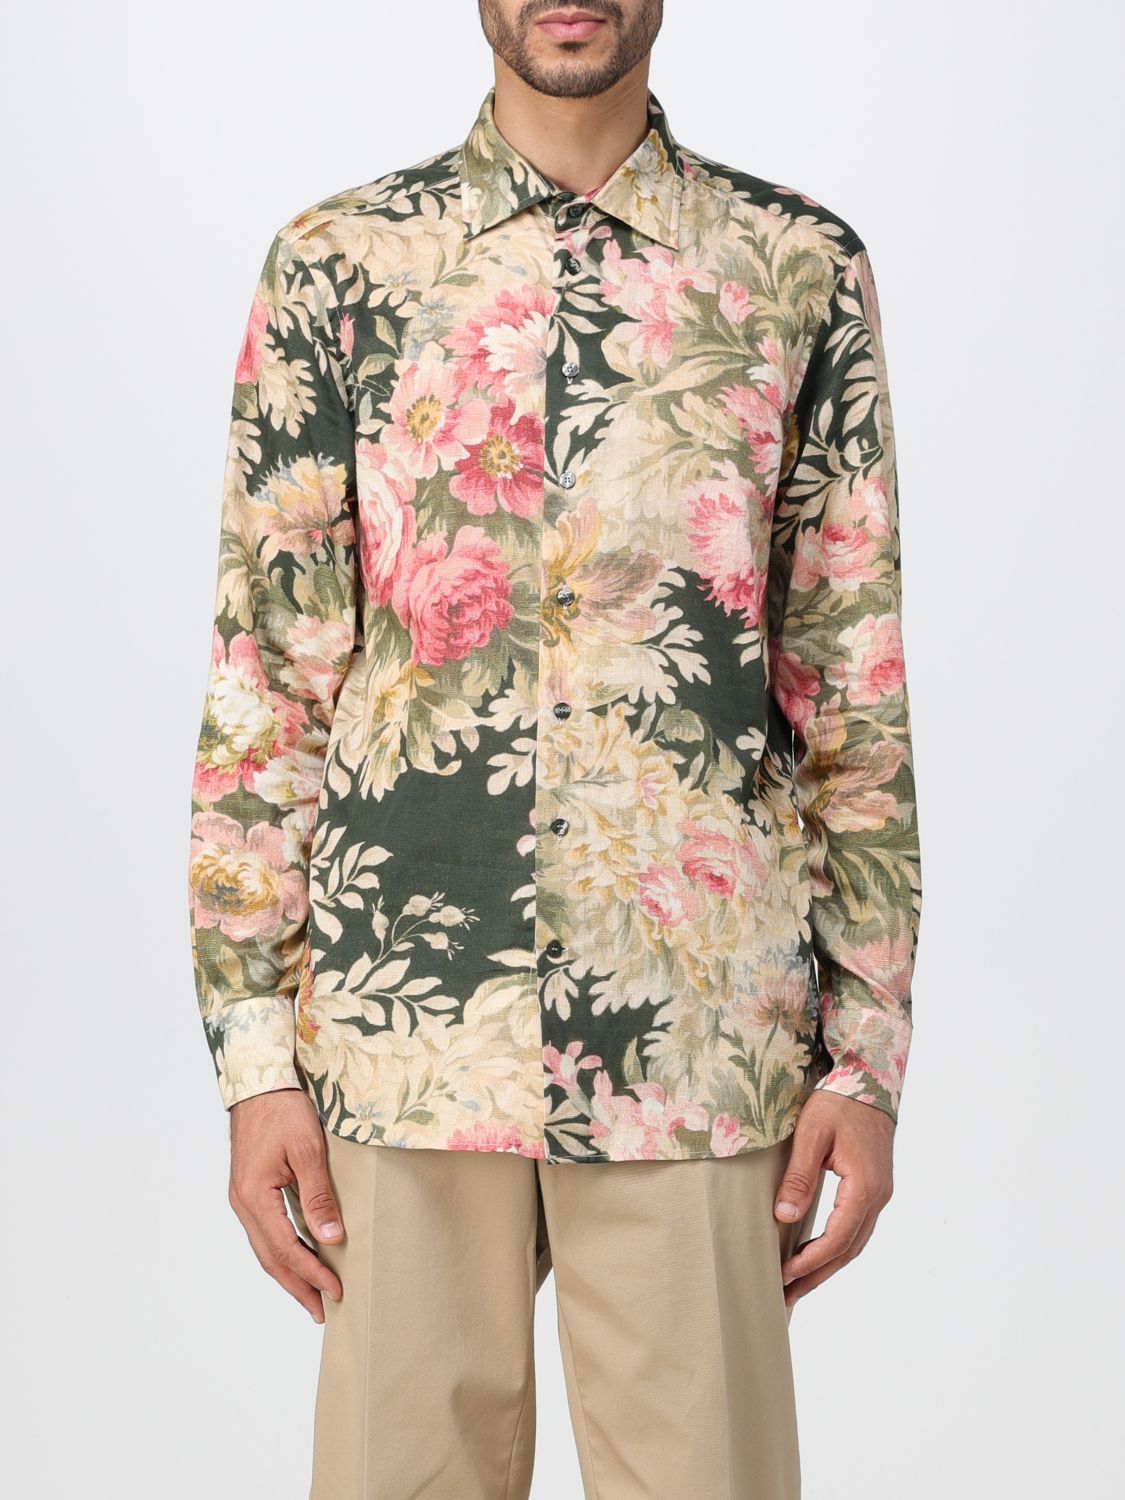 ETRO SHIRT WITH FLORAL PATTERN,E65785012